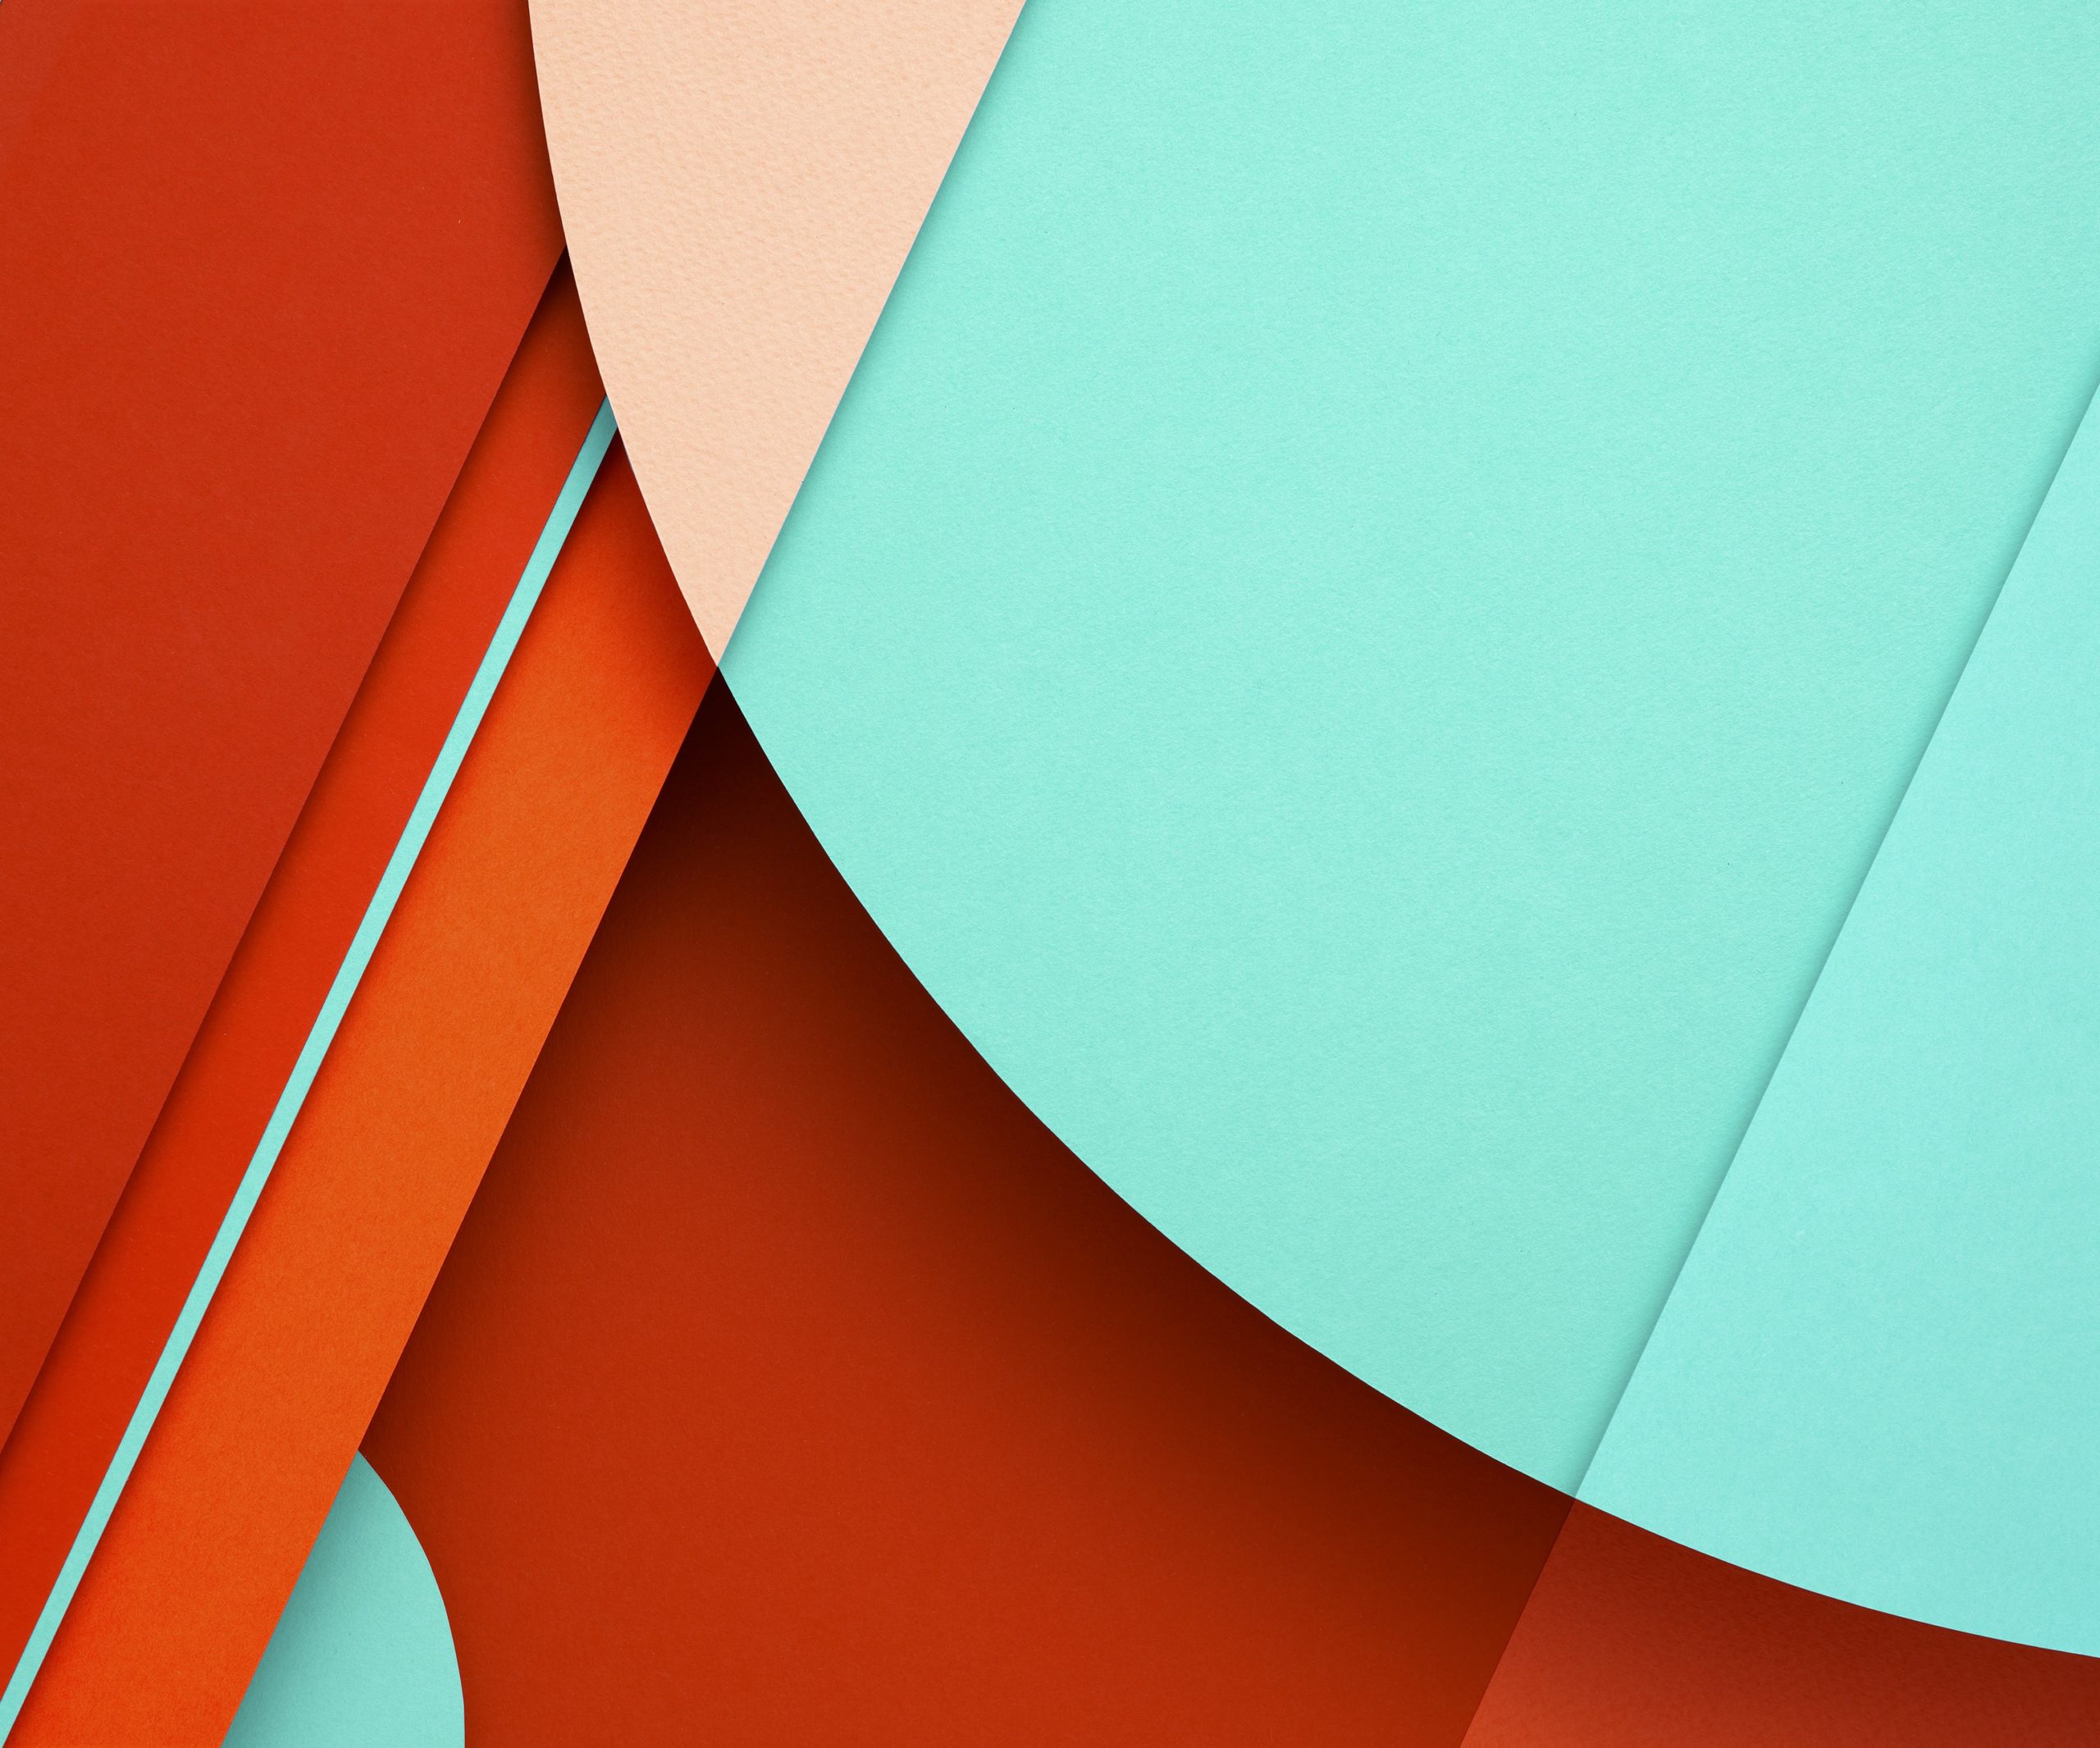 Weekly Wallpaper: Play With Digital Paper With These Android 5.0 Wallpapers